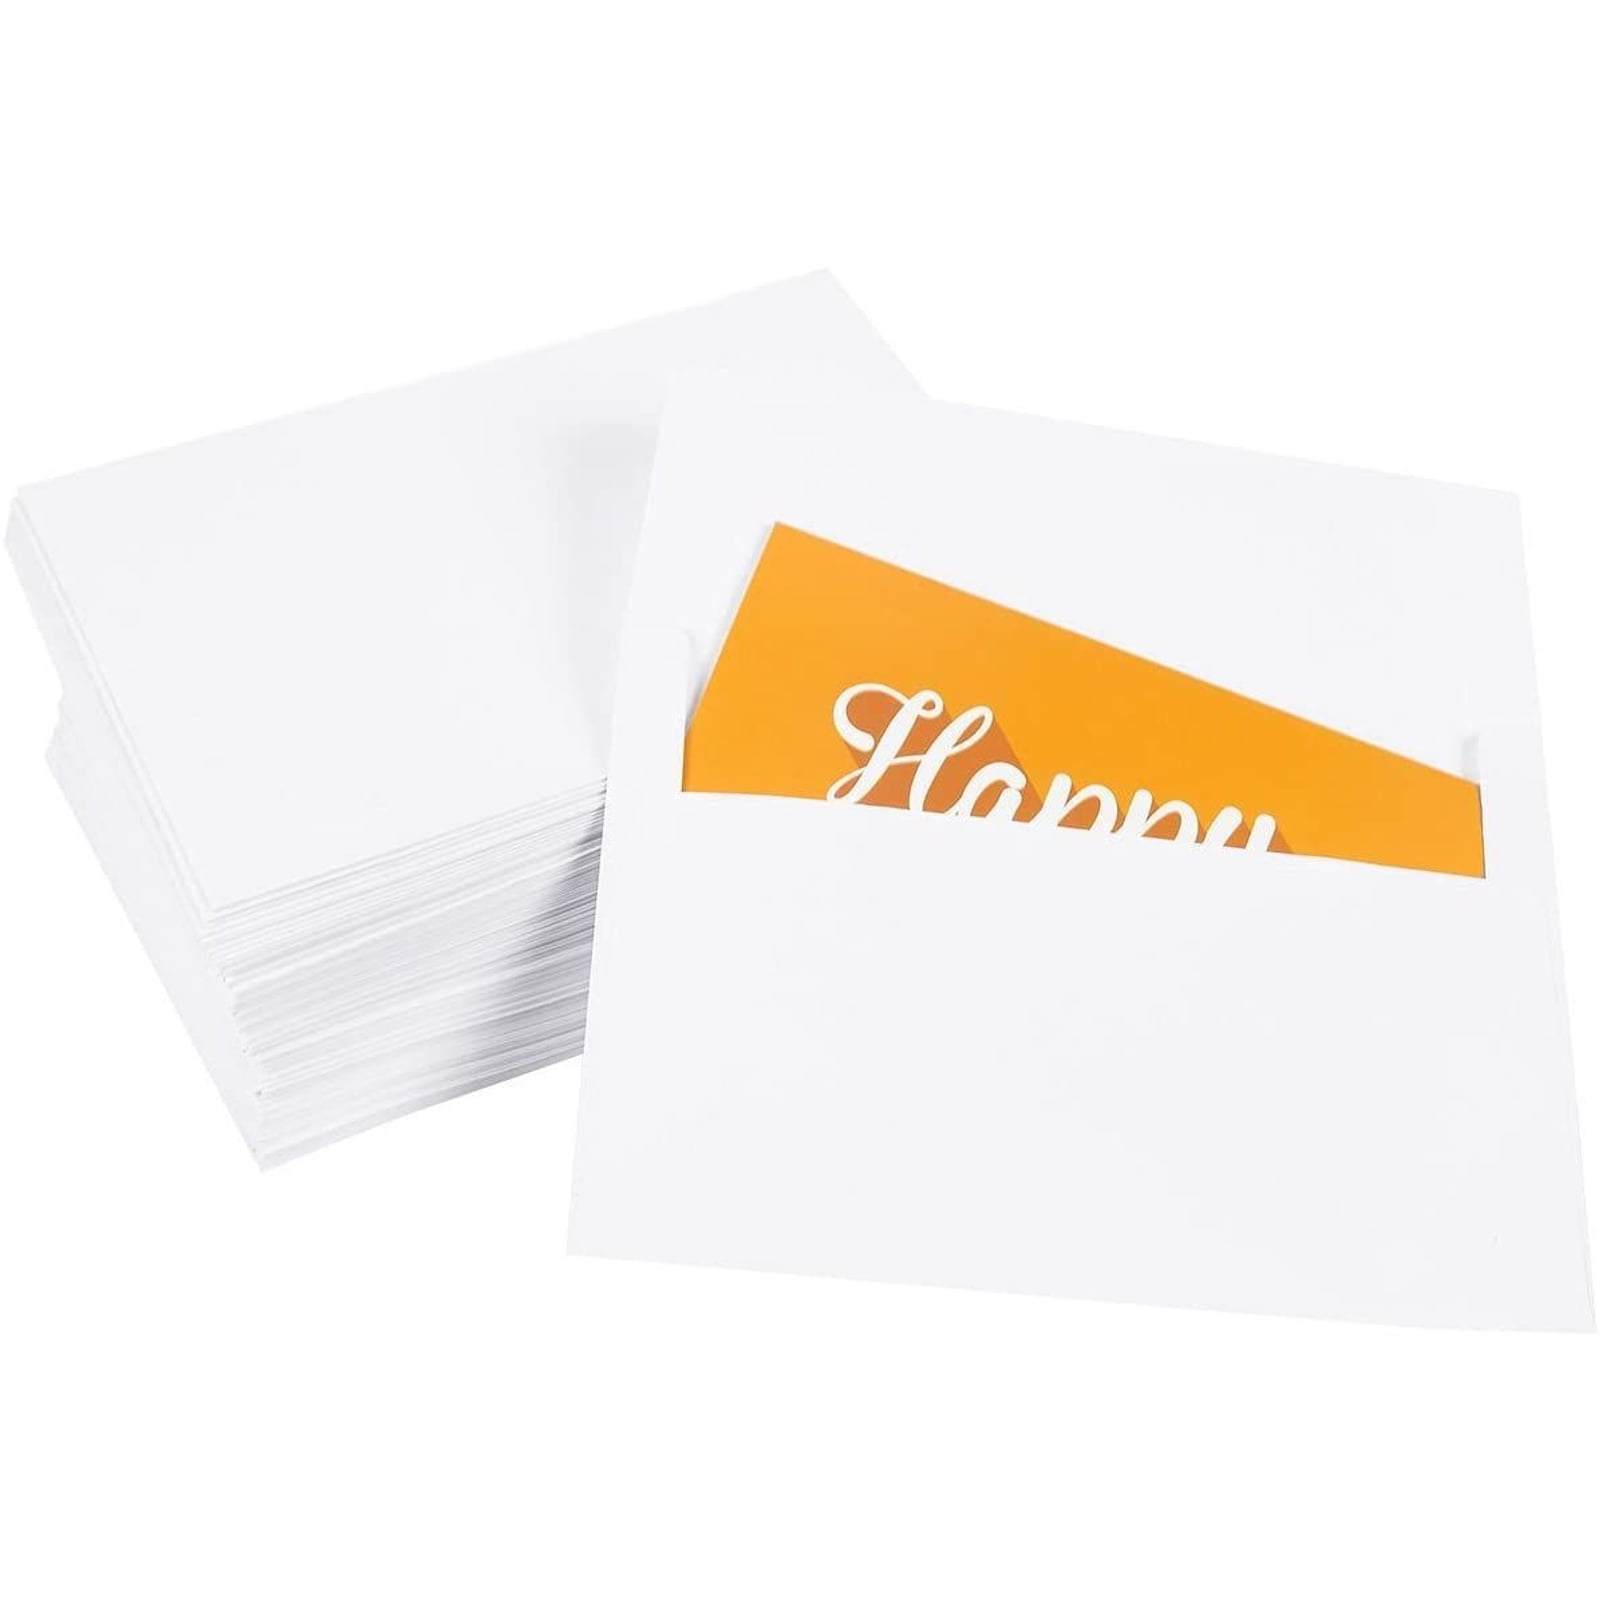 VANRA 170 Sets Small Blank 4.5x3.2in Envelopes + 4x2.7in Cards, Multicolored